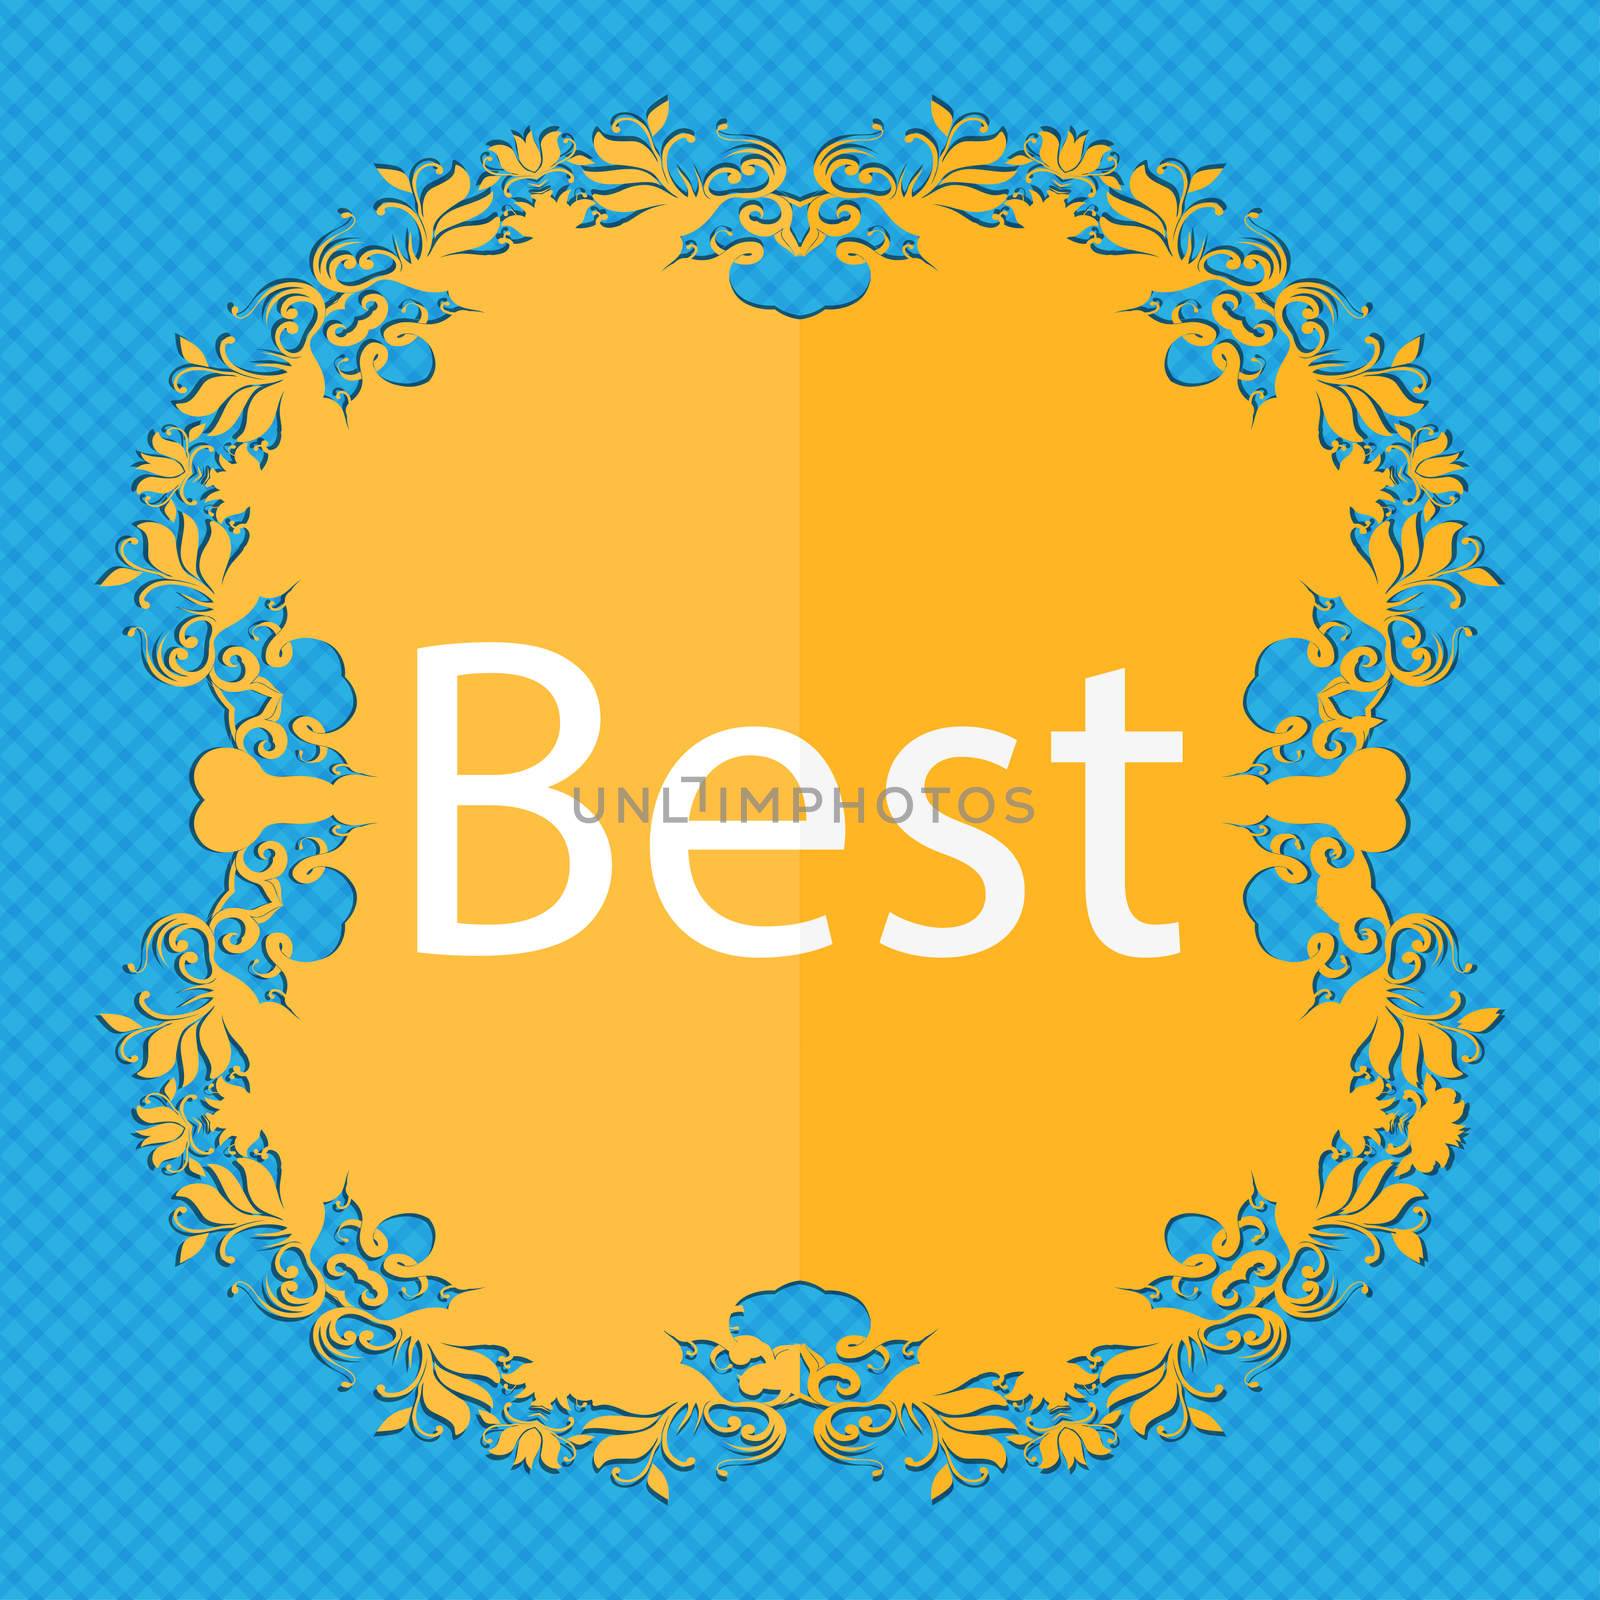 Best seller sign icon. Best-seller award symbol. Floral flat design on a blue abstract background with place for your text.  by serhii_lohvyniuk